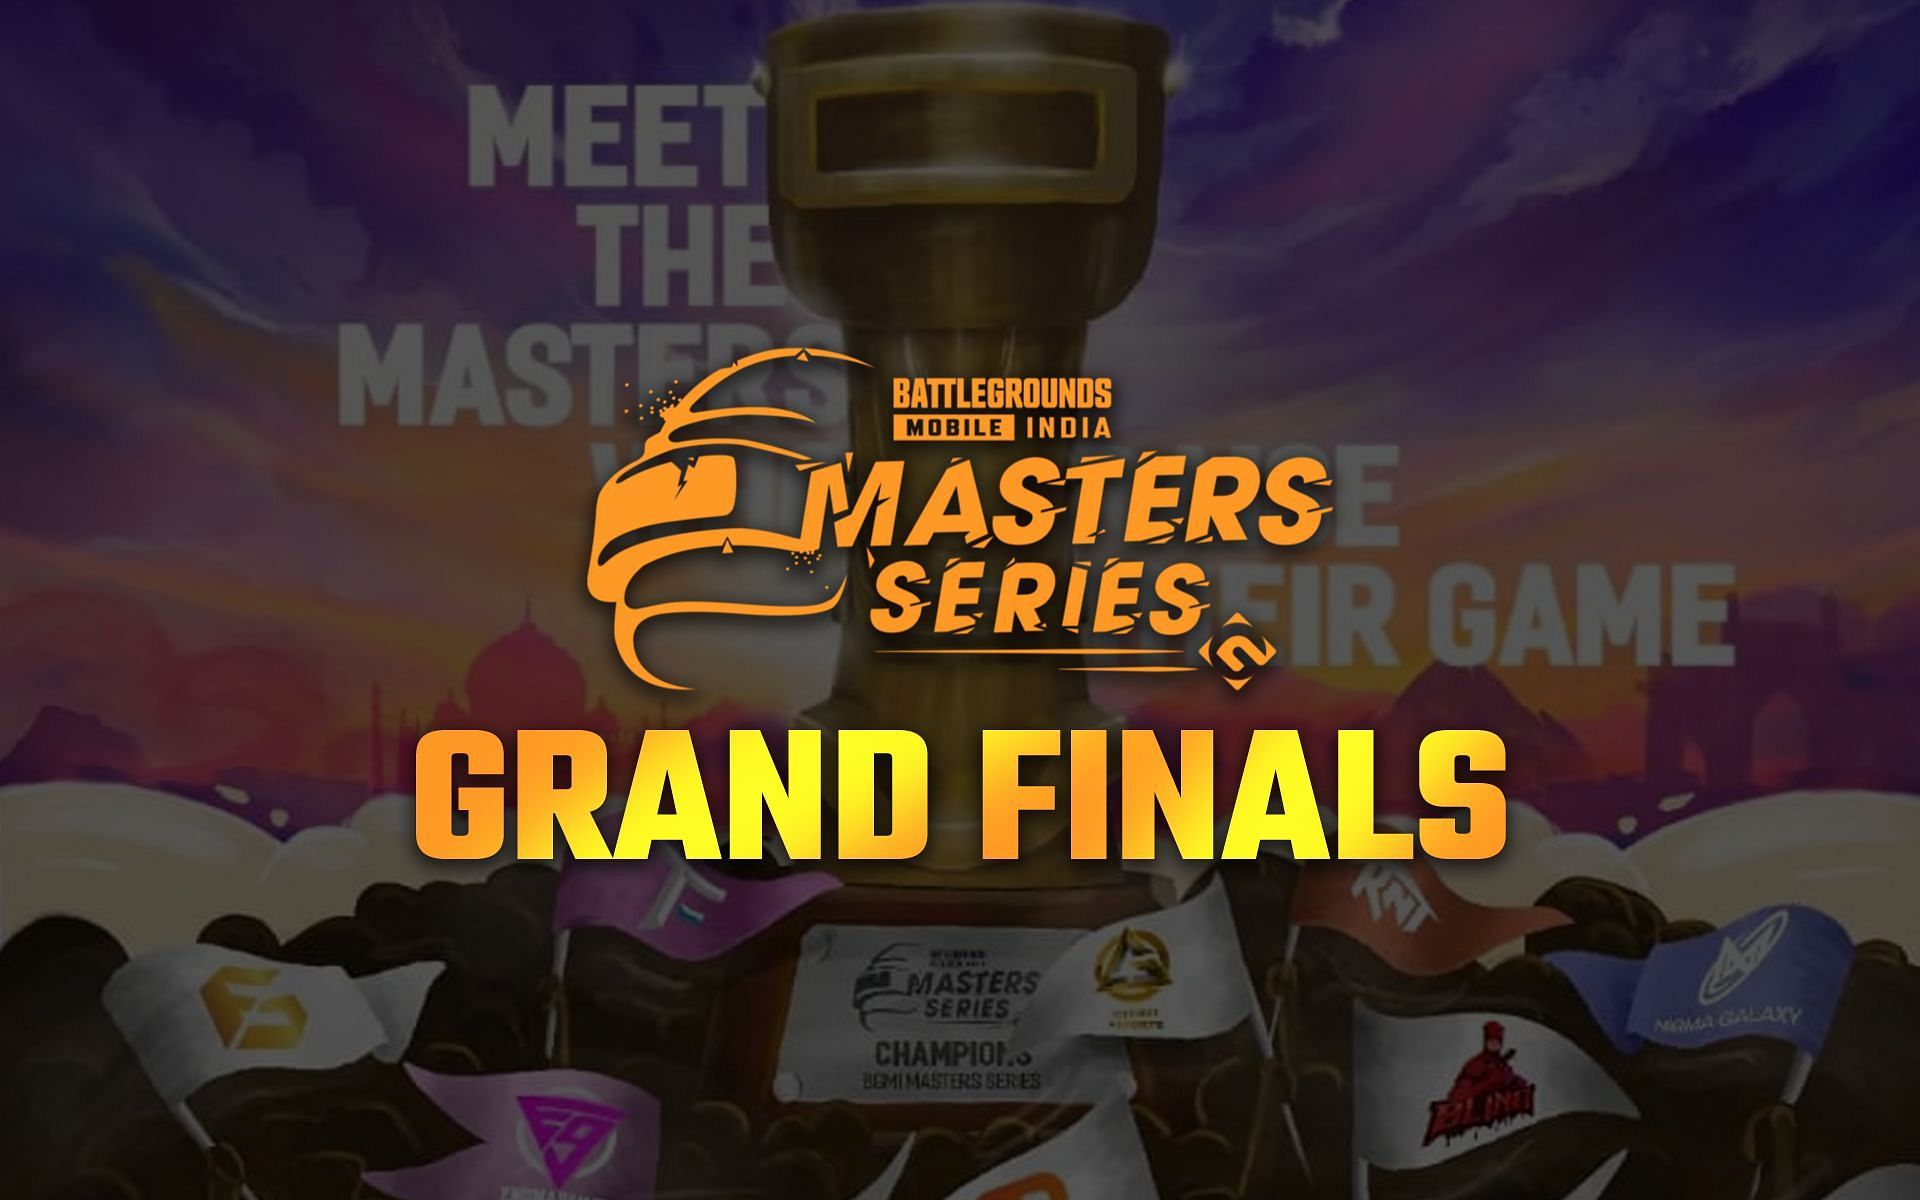 The Grand Finals of the ongoing BGMI Masters Series LAN event began yesterday (Image via Sportskeeda)